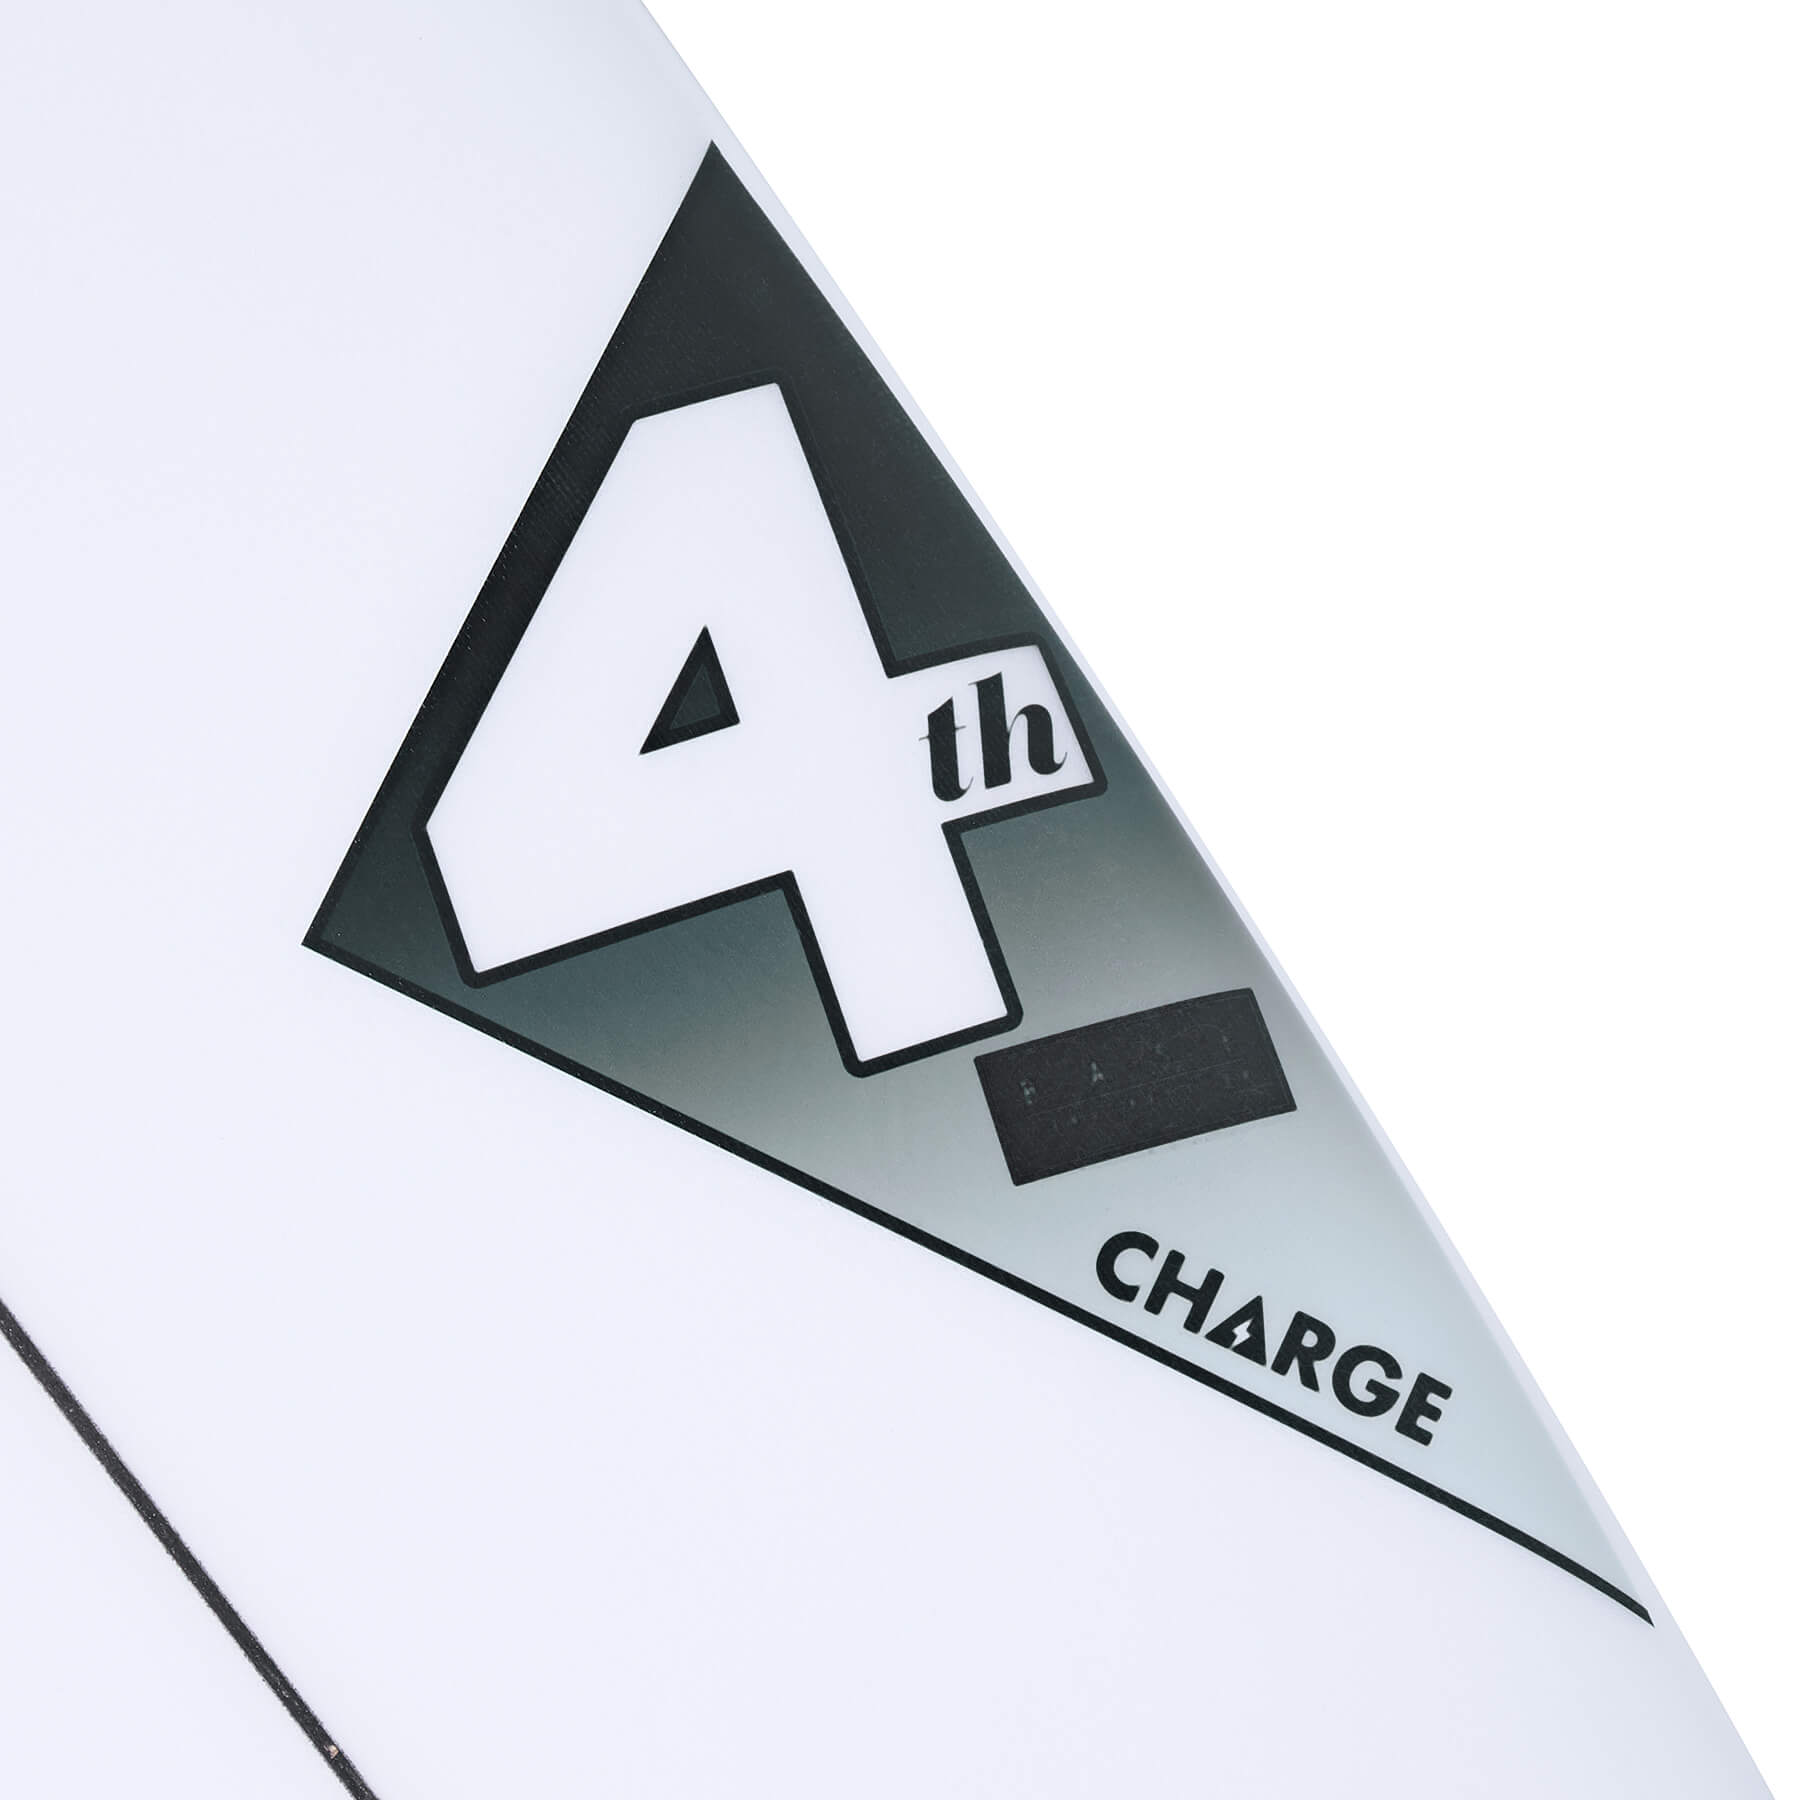 Fourth Surfboards Charge 2.0